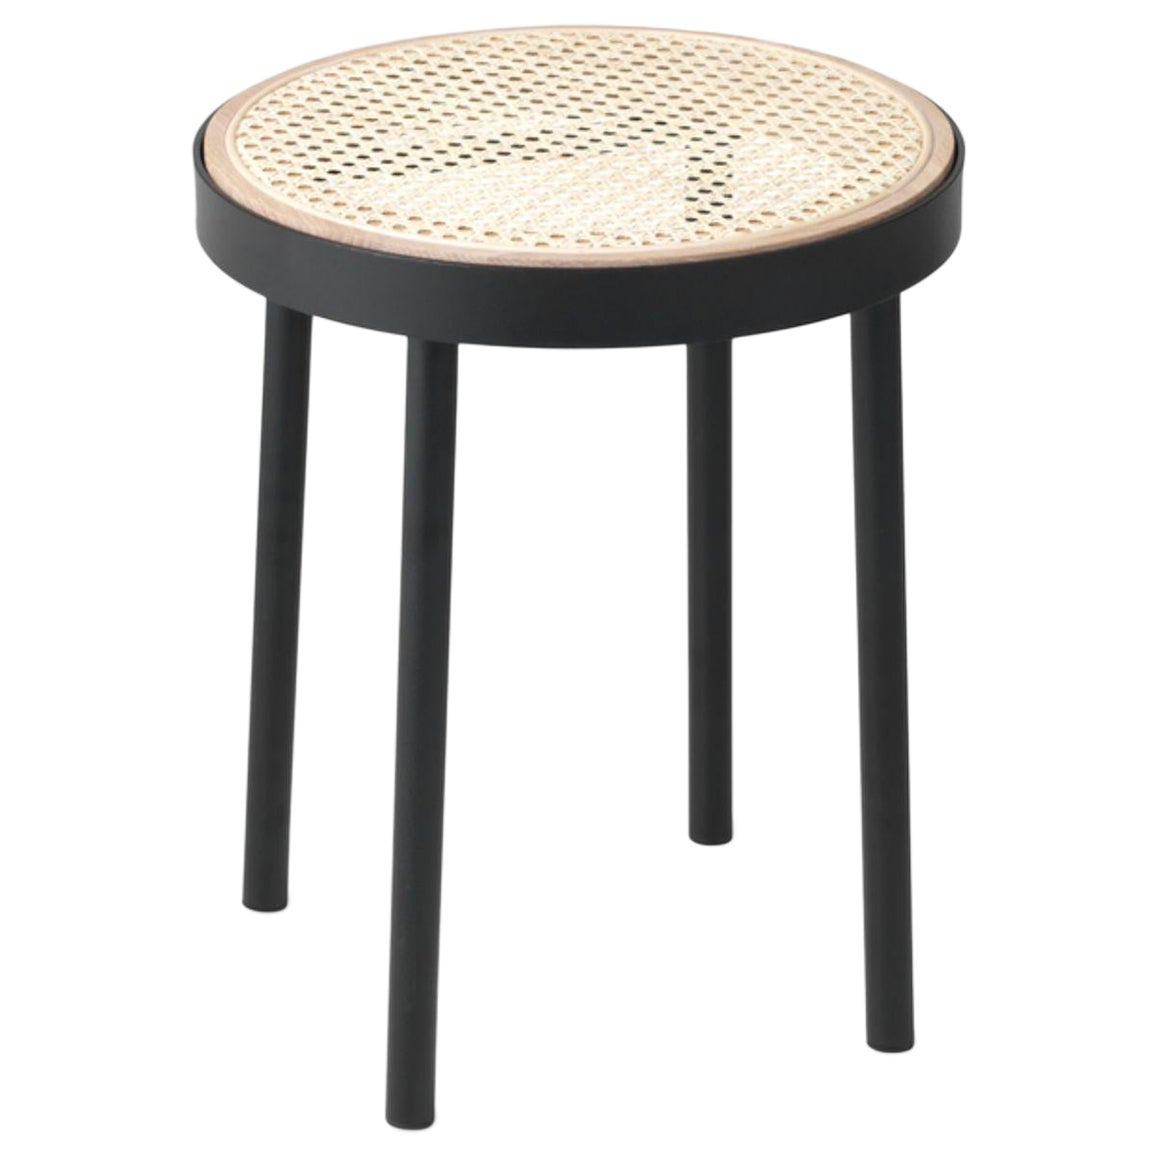 Be My Guest Stool by Warm Nordic For Sale